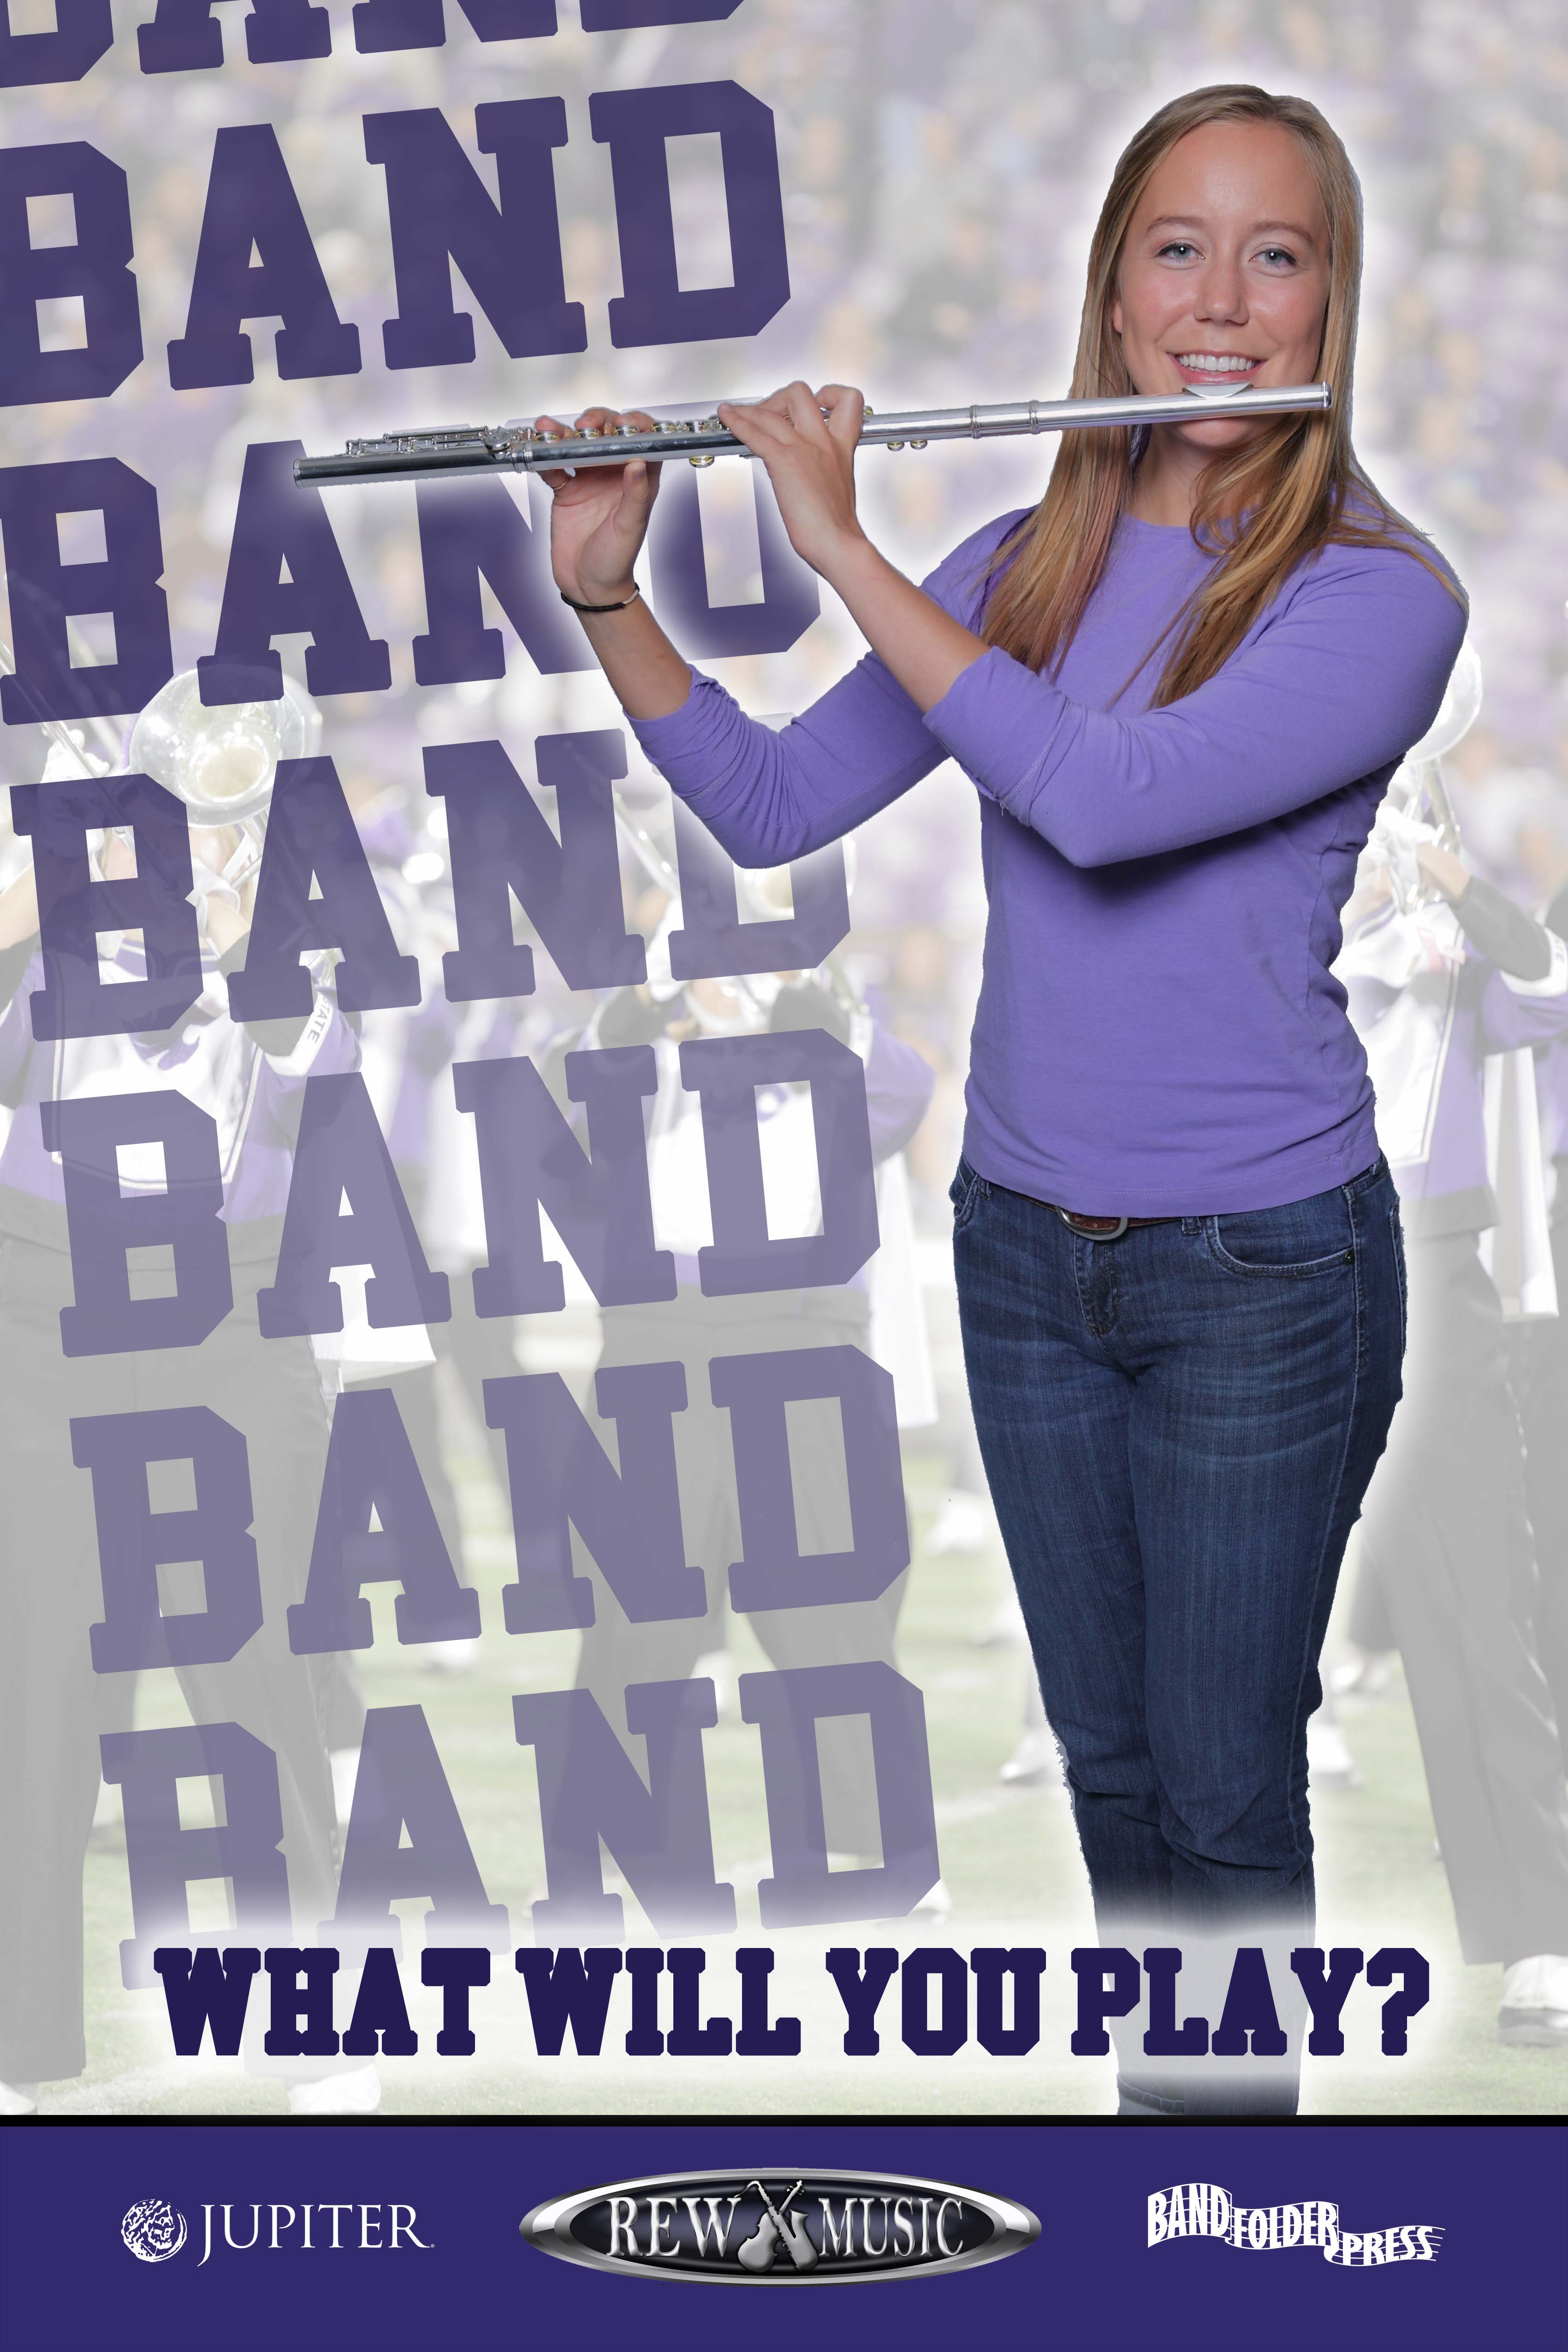 Join the School Band Flute player